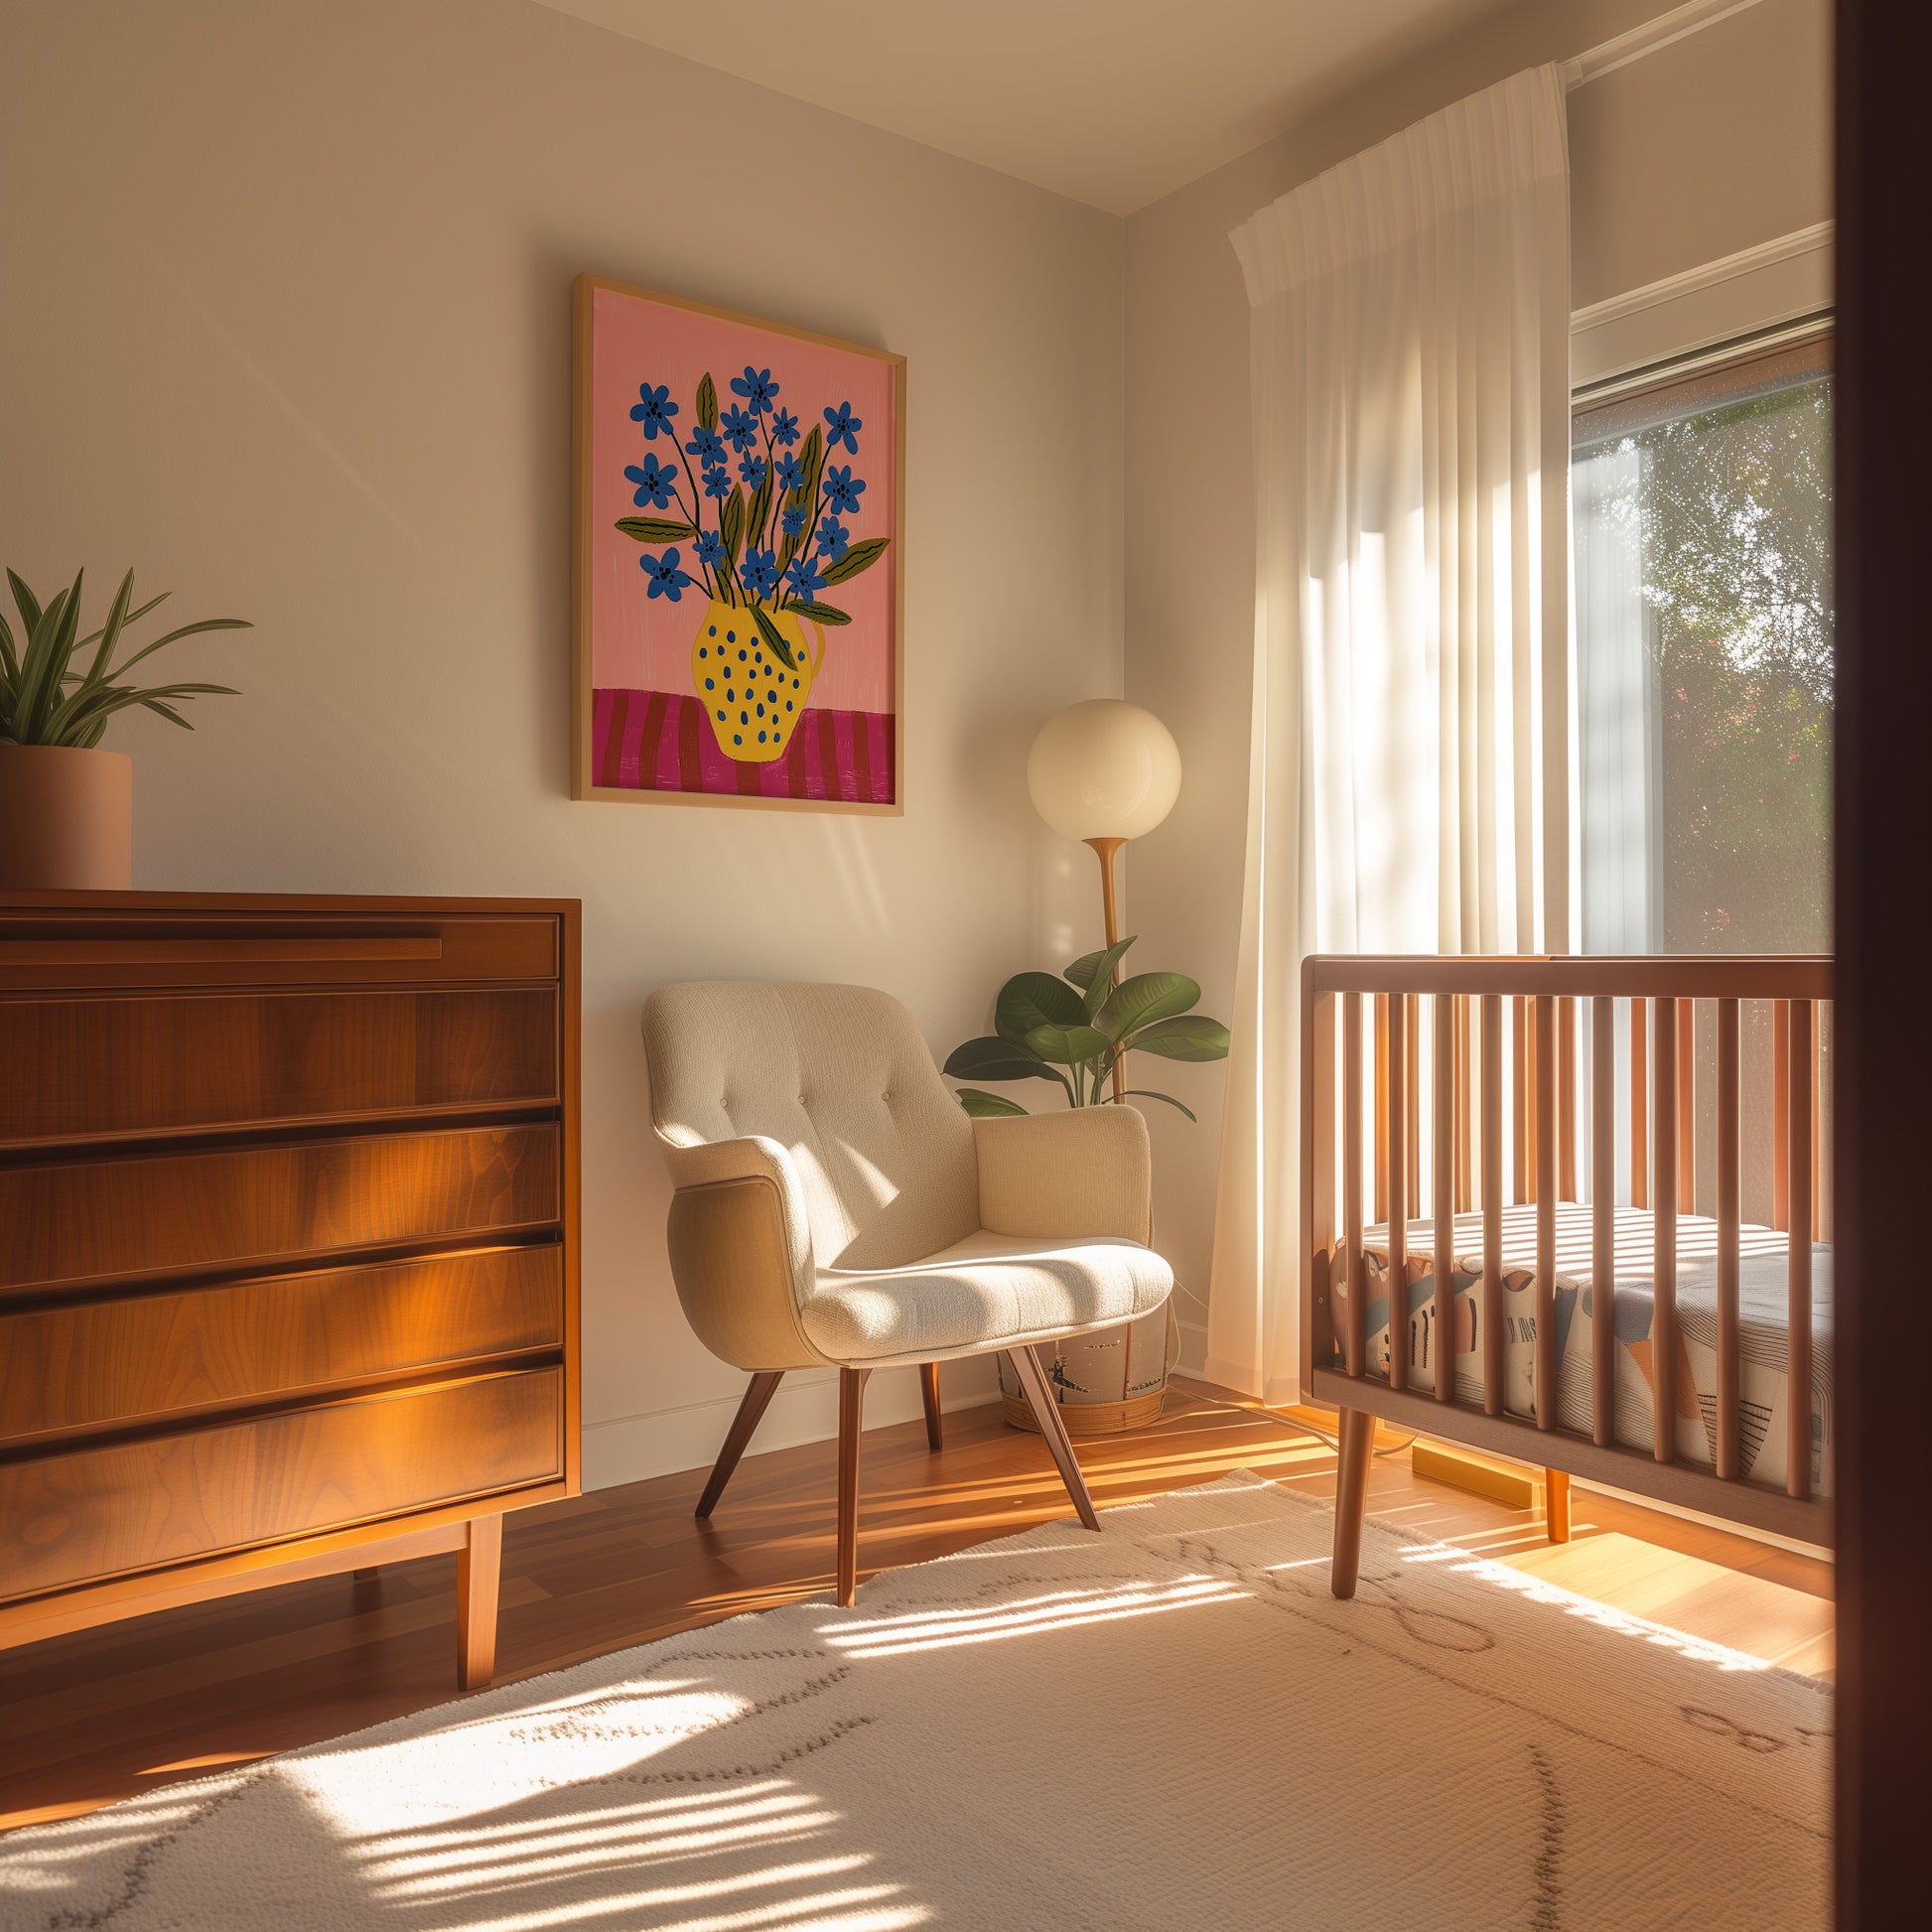 A cozy nursery room with a crib, a comfortable chair, and warm sunlight filtering through the window.